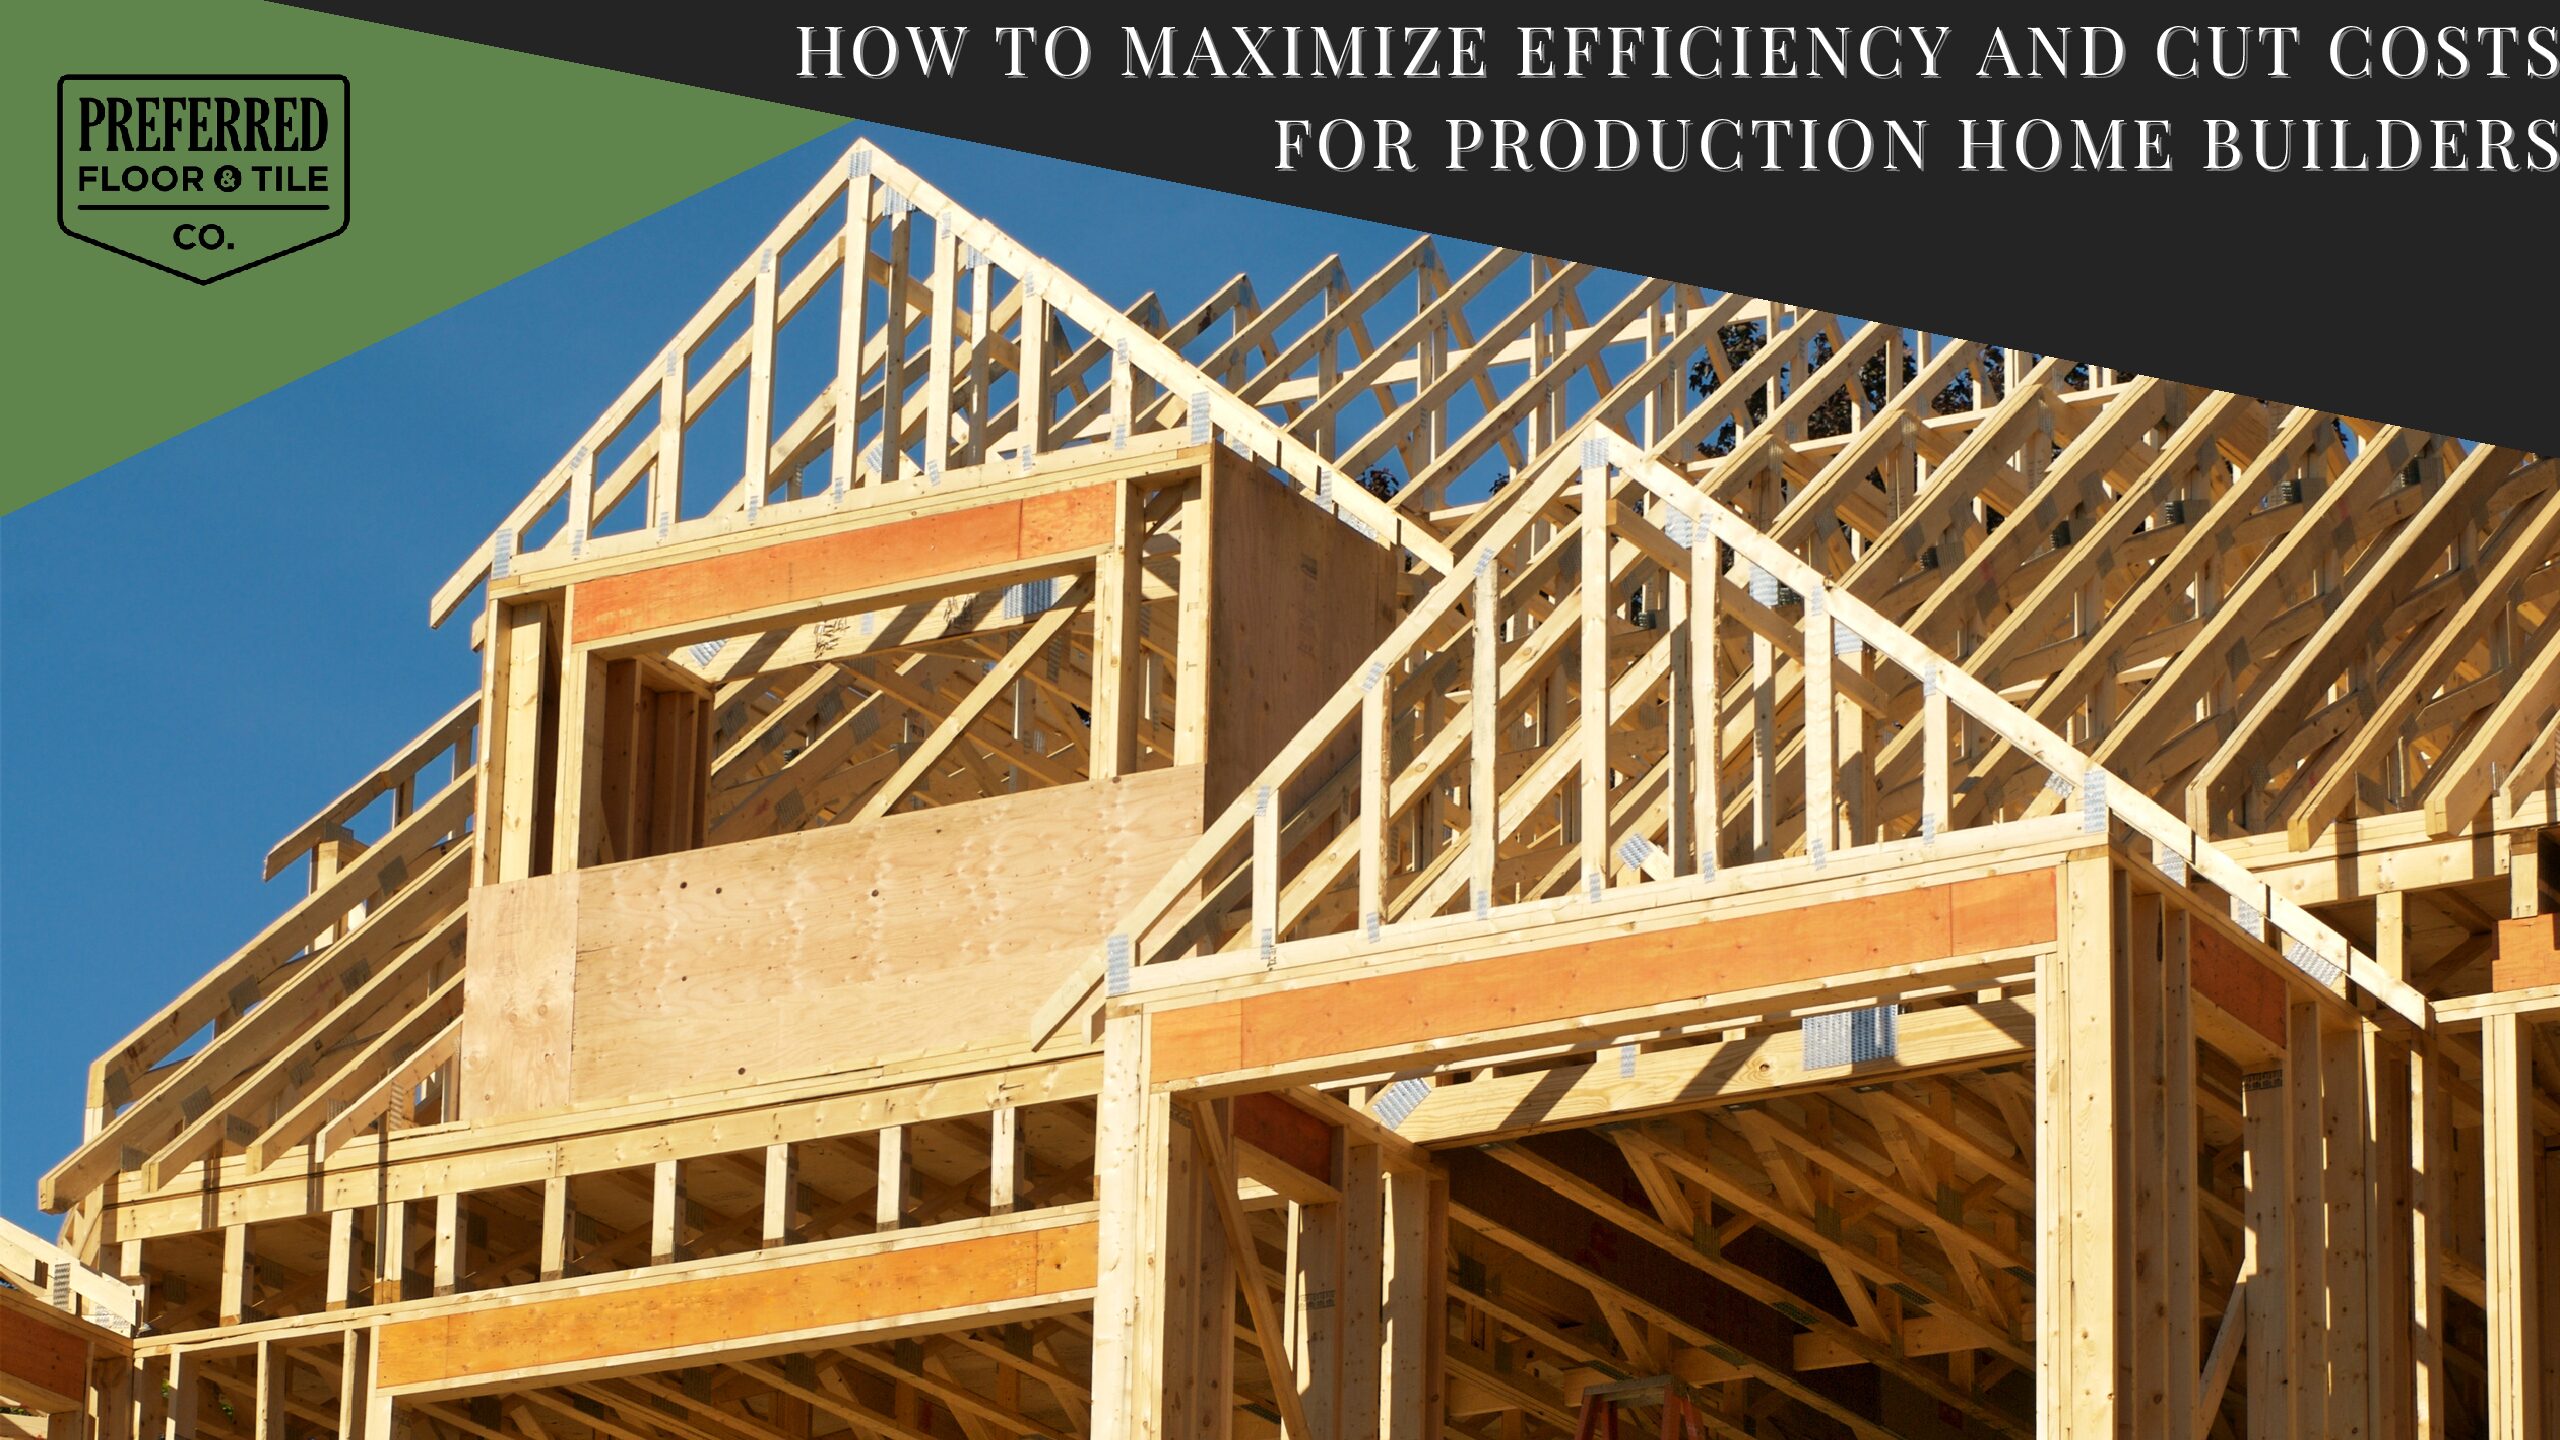 How to Maximize Efficiency and Cut Costs for Production Home Builders